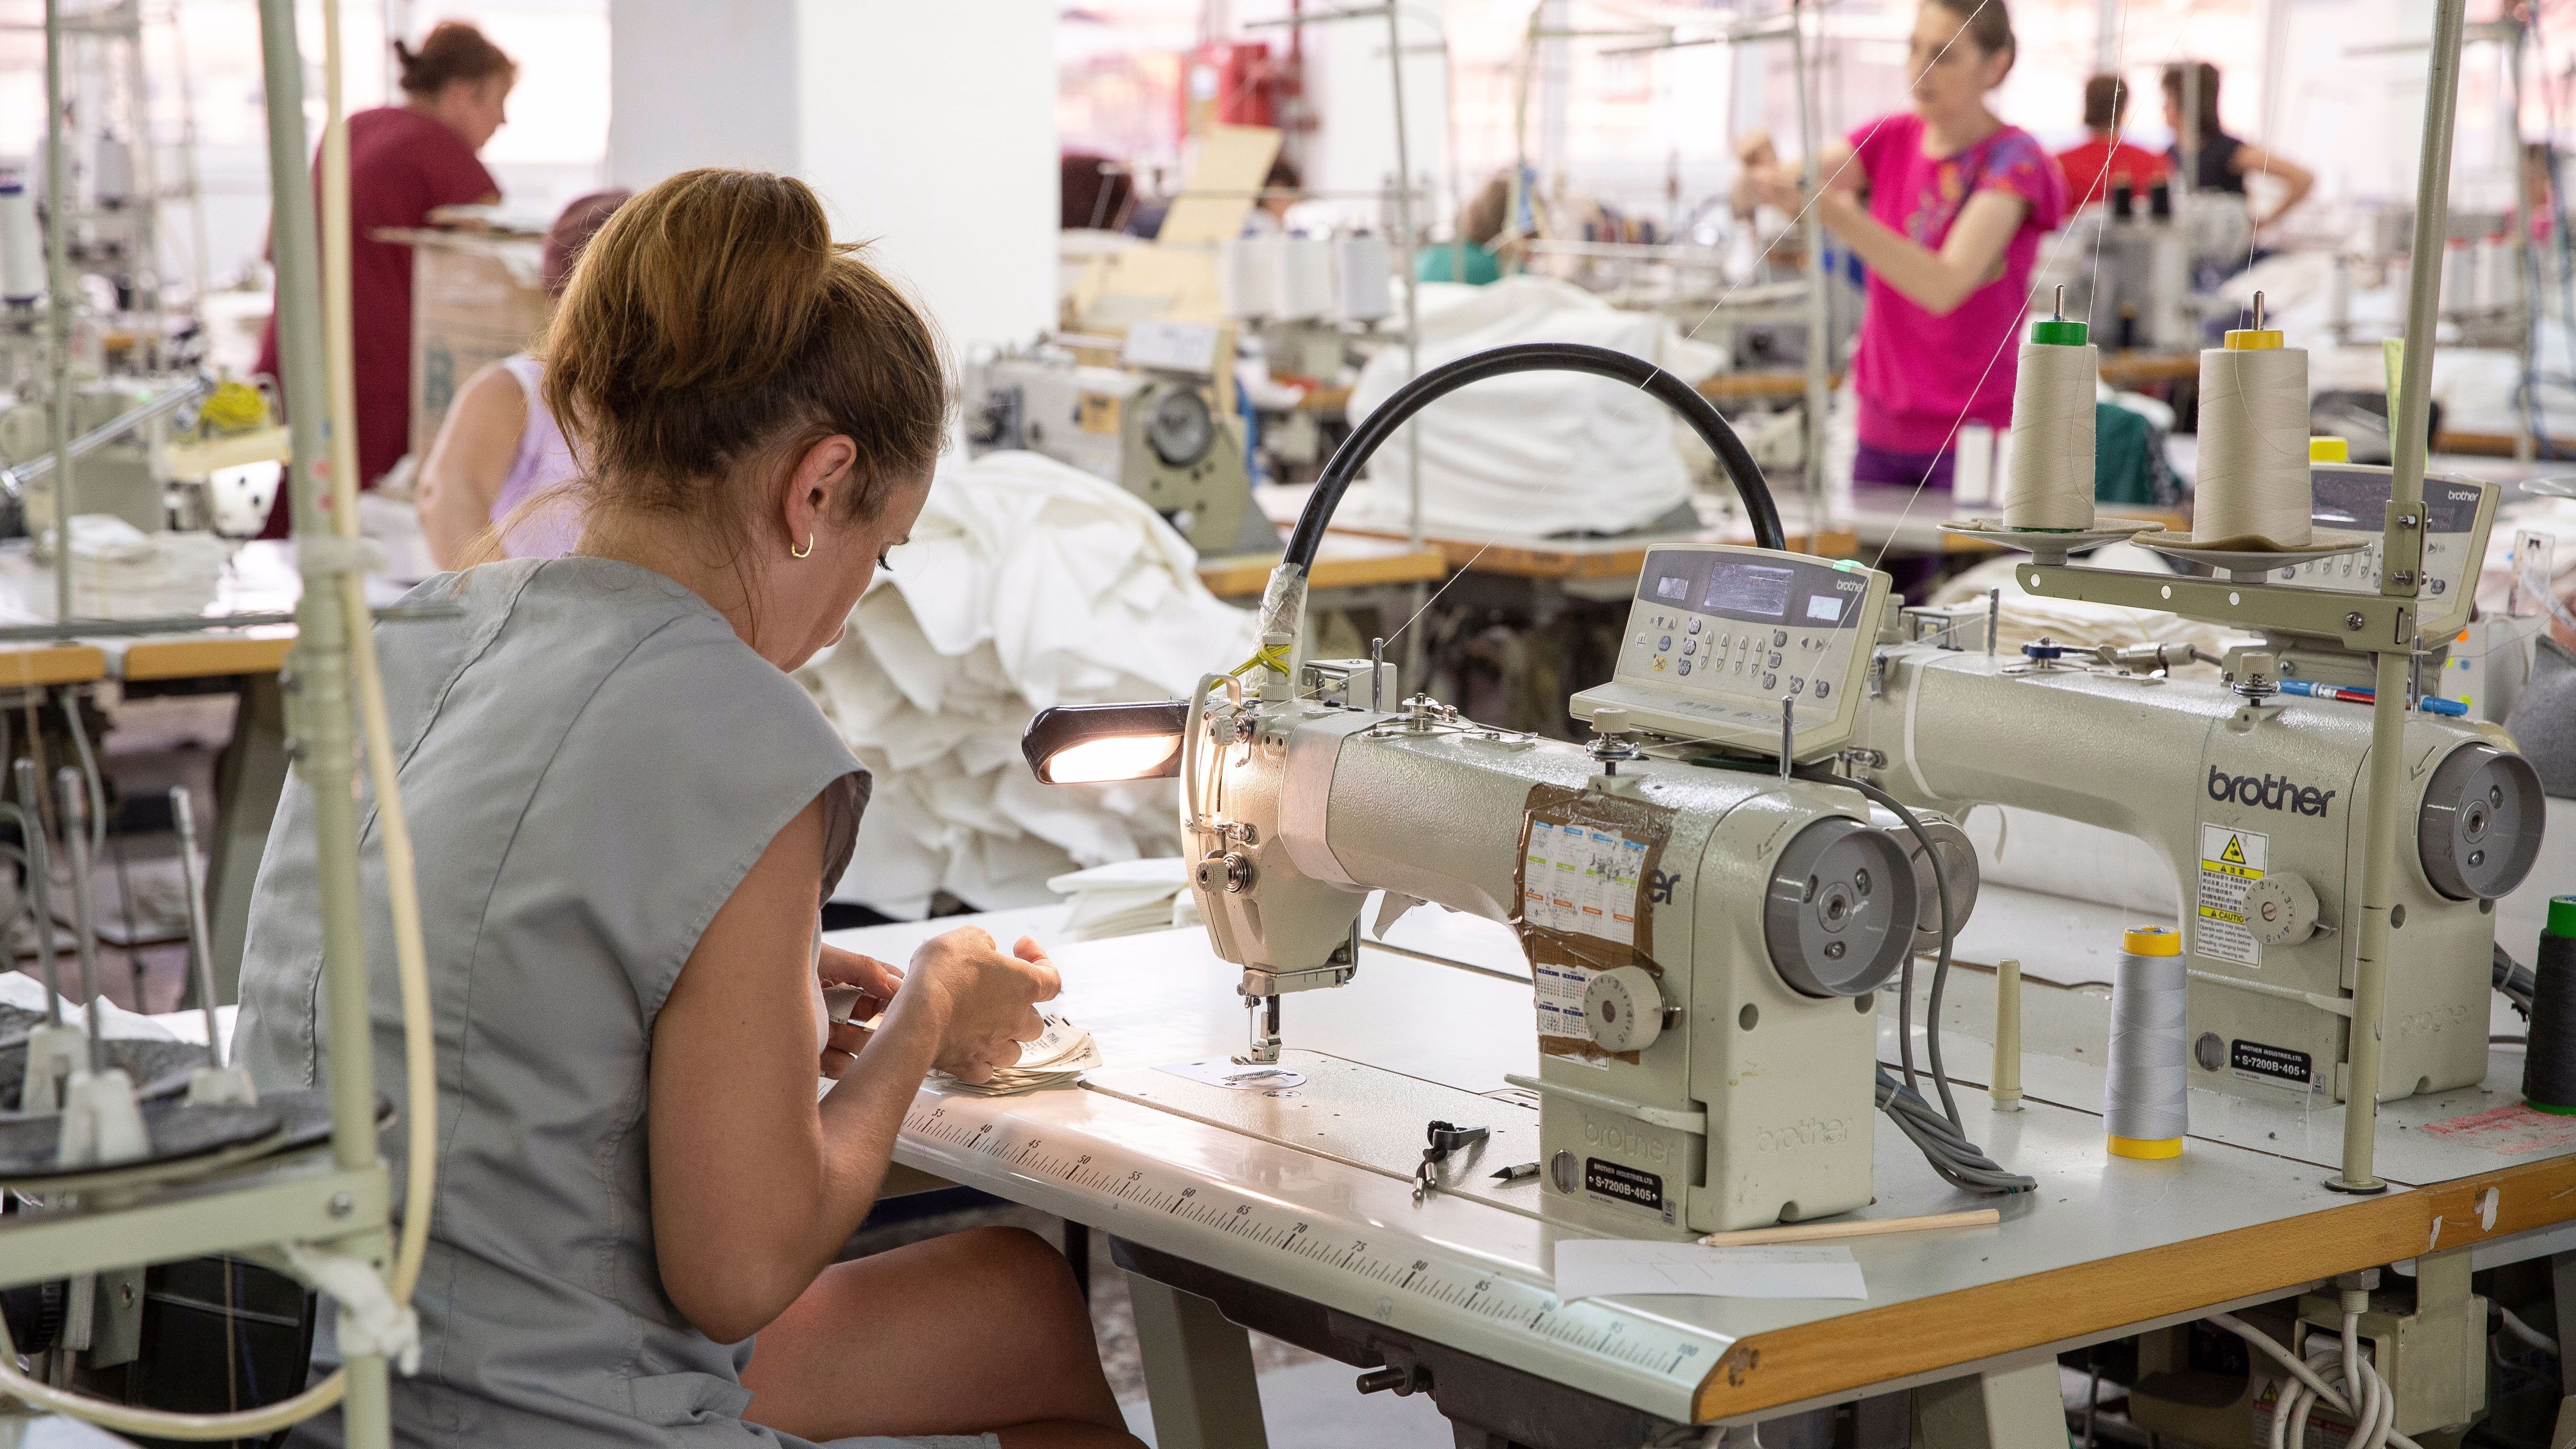 A future EU Textiles Strategy which protects workers and the planet